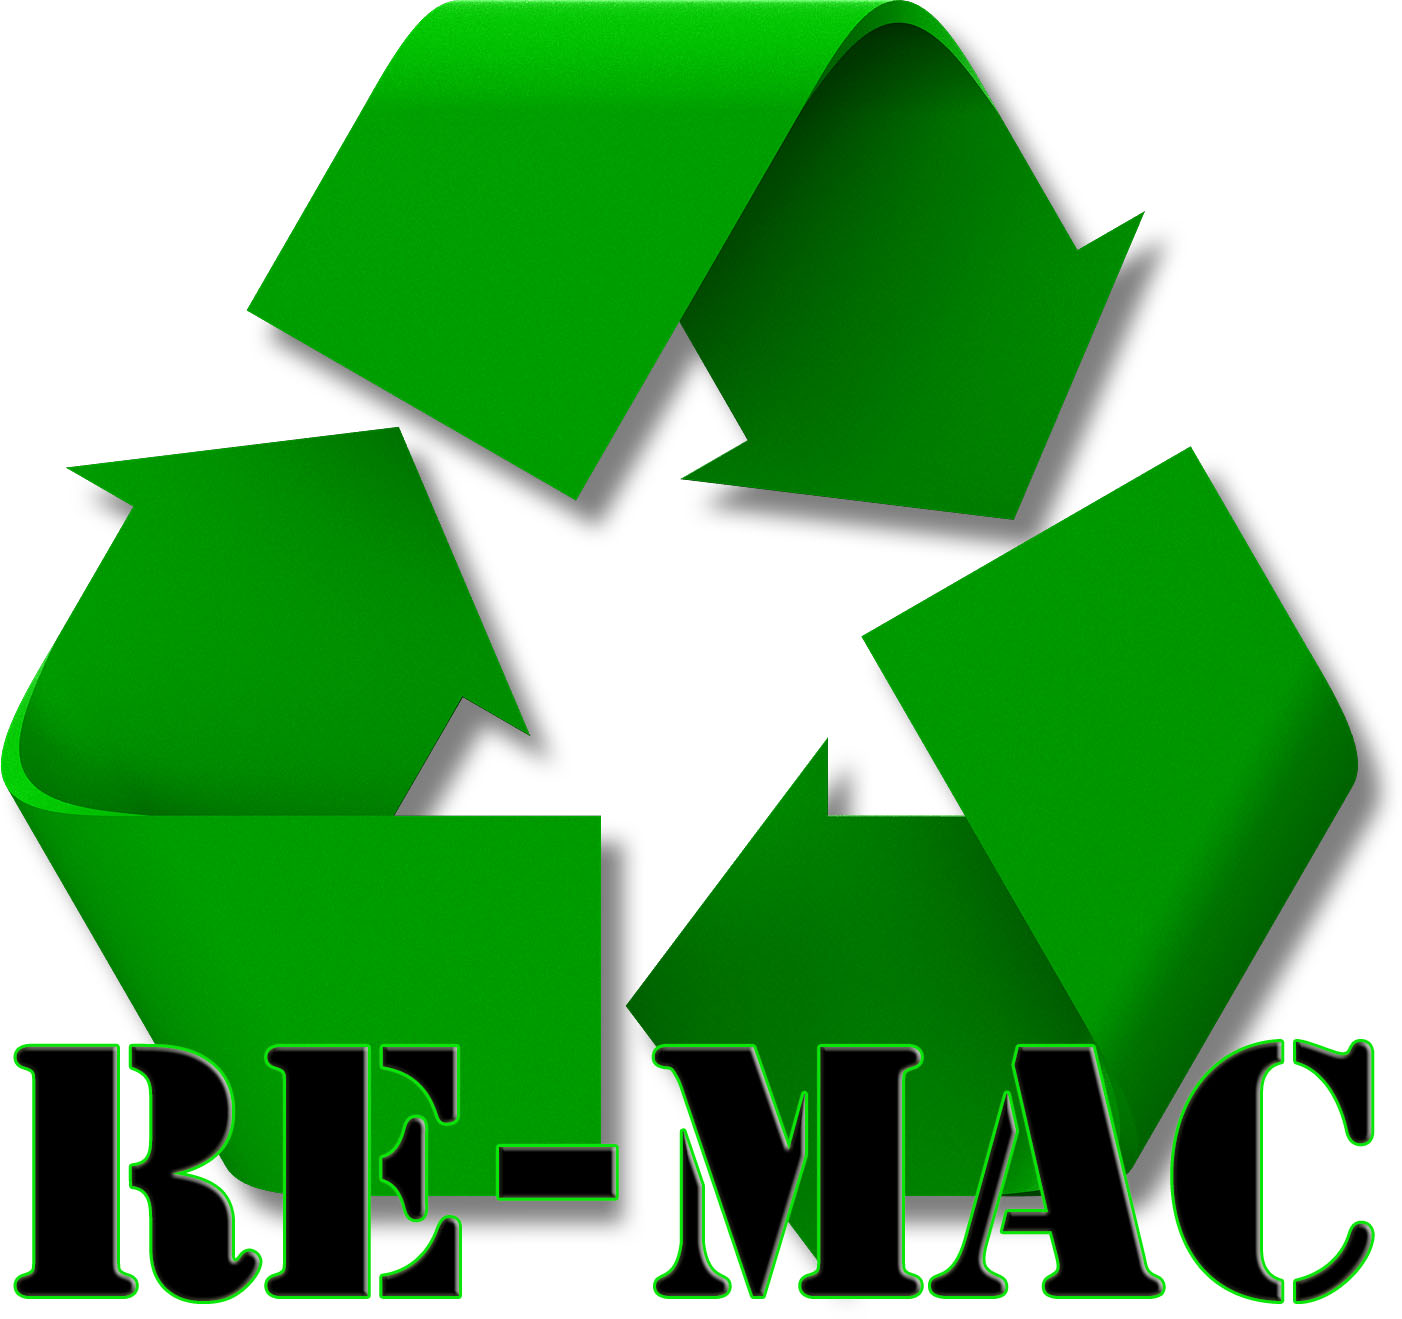 Recycle MacBooks For Re-Use